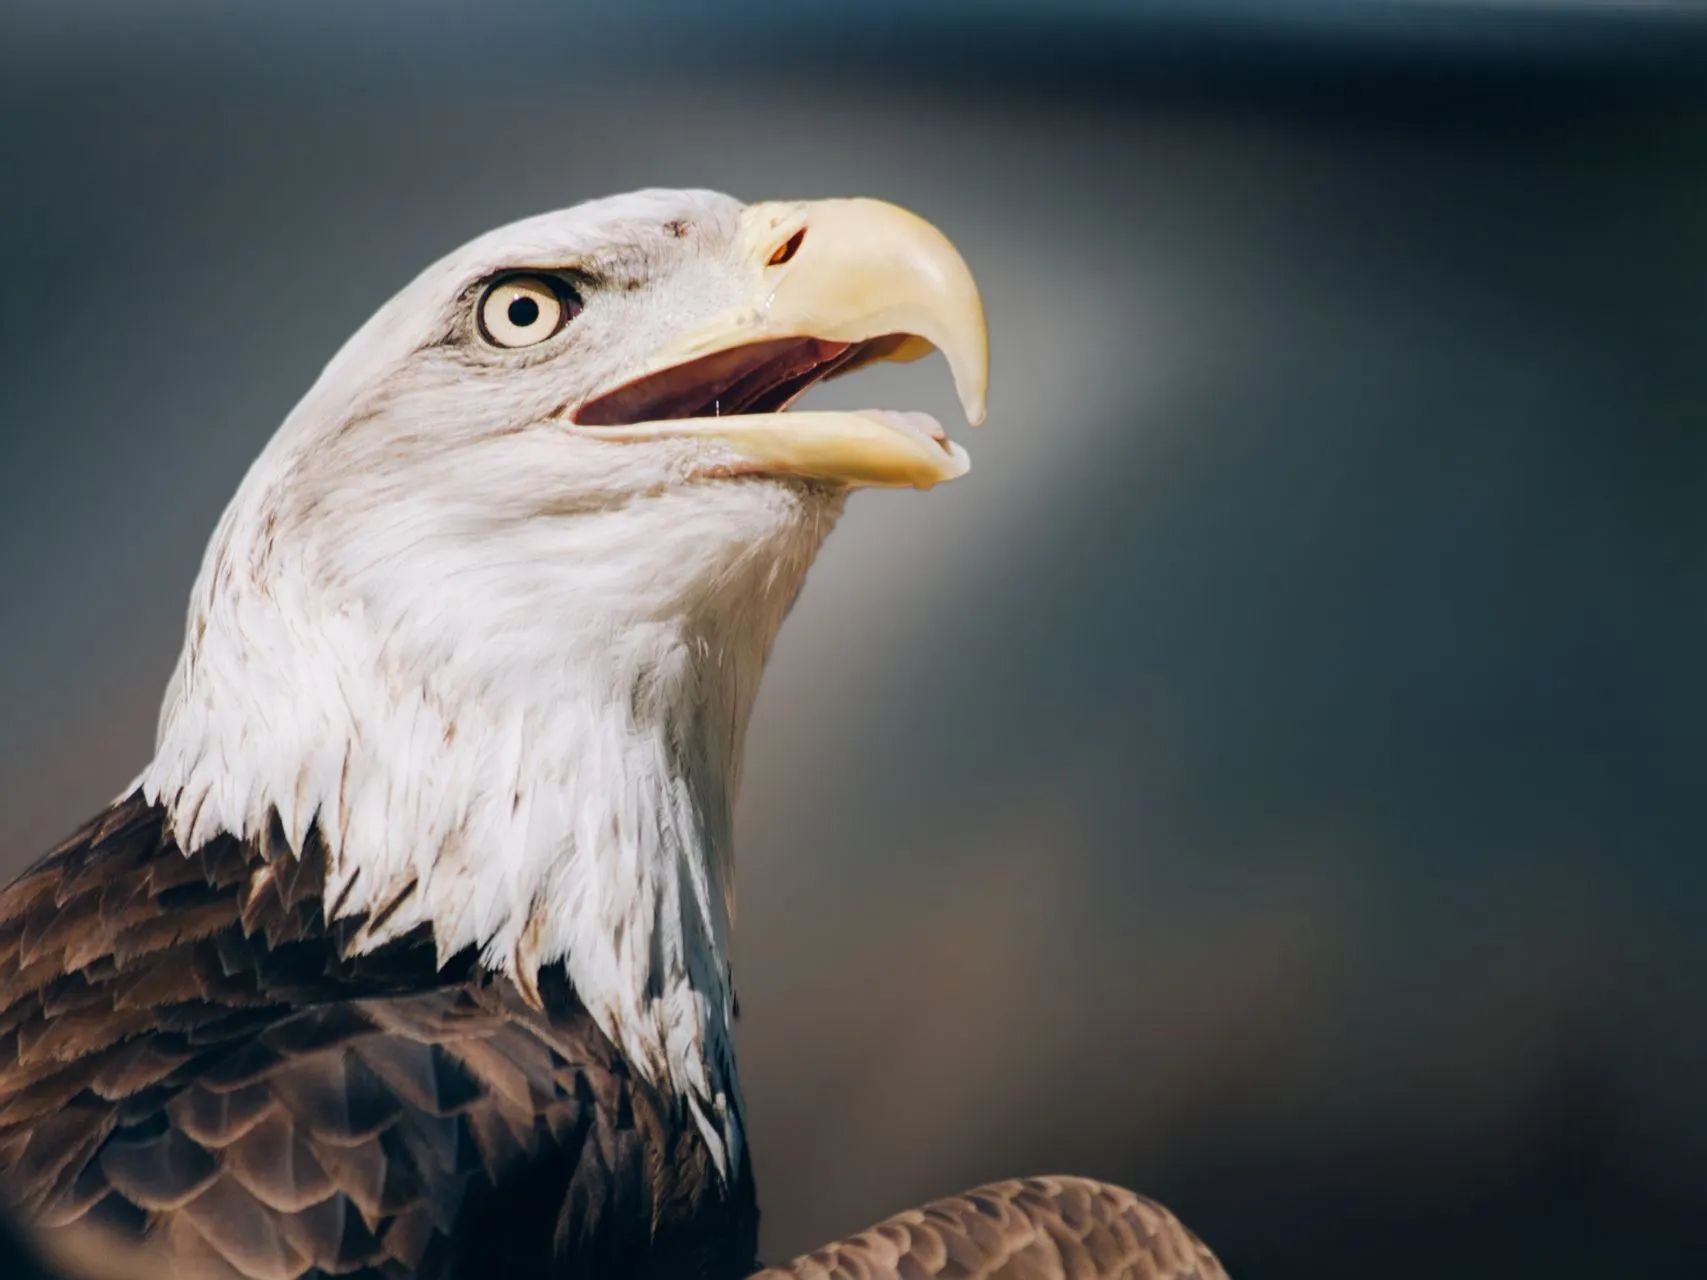 a bald eagle with its beak wide open